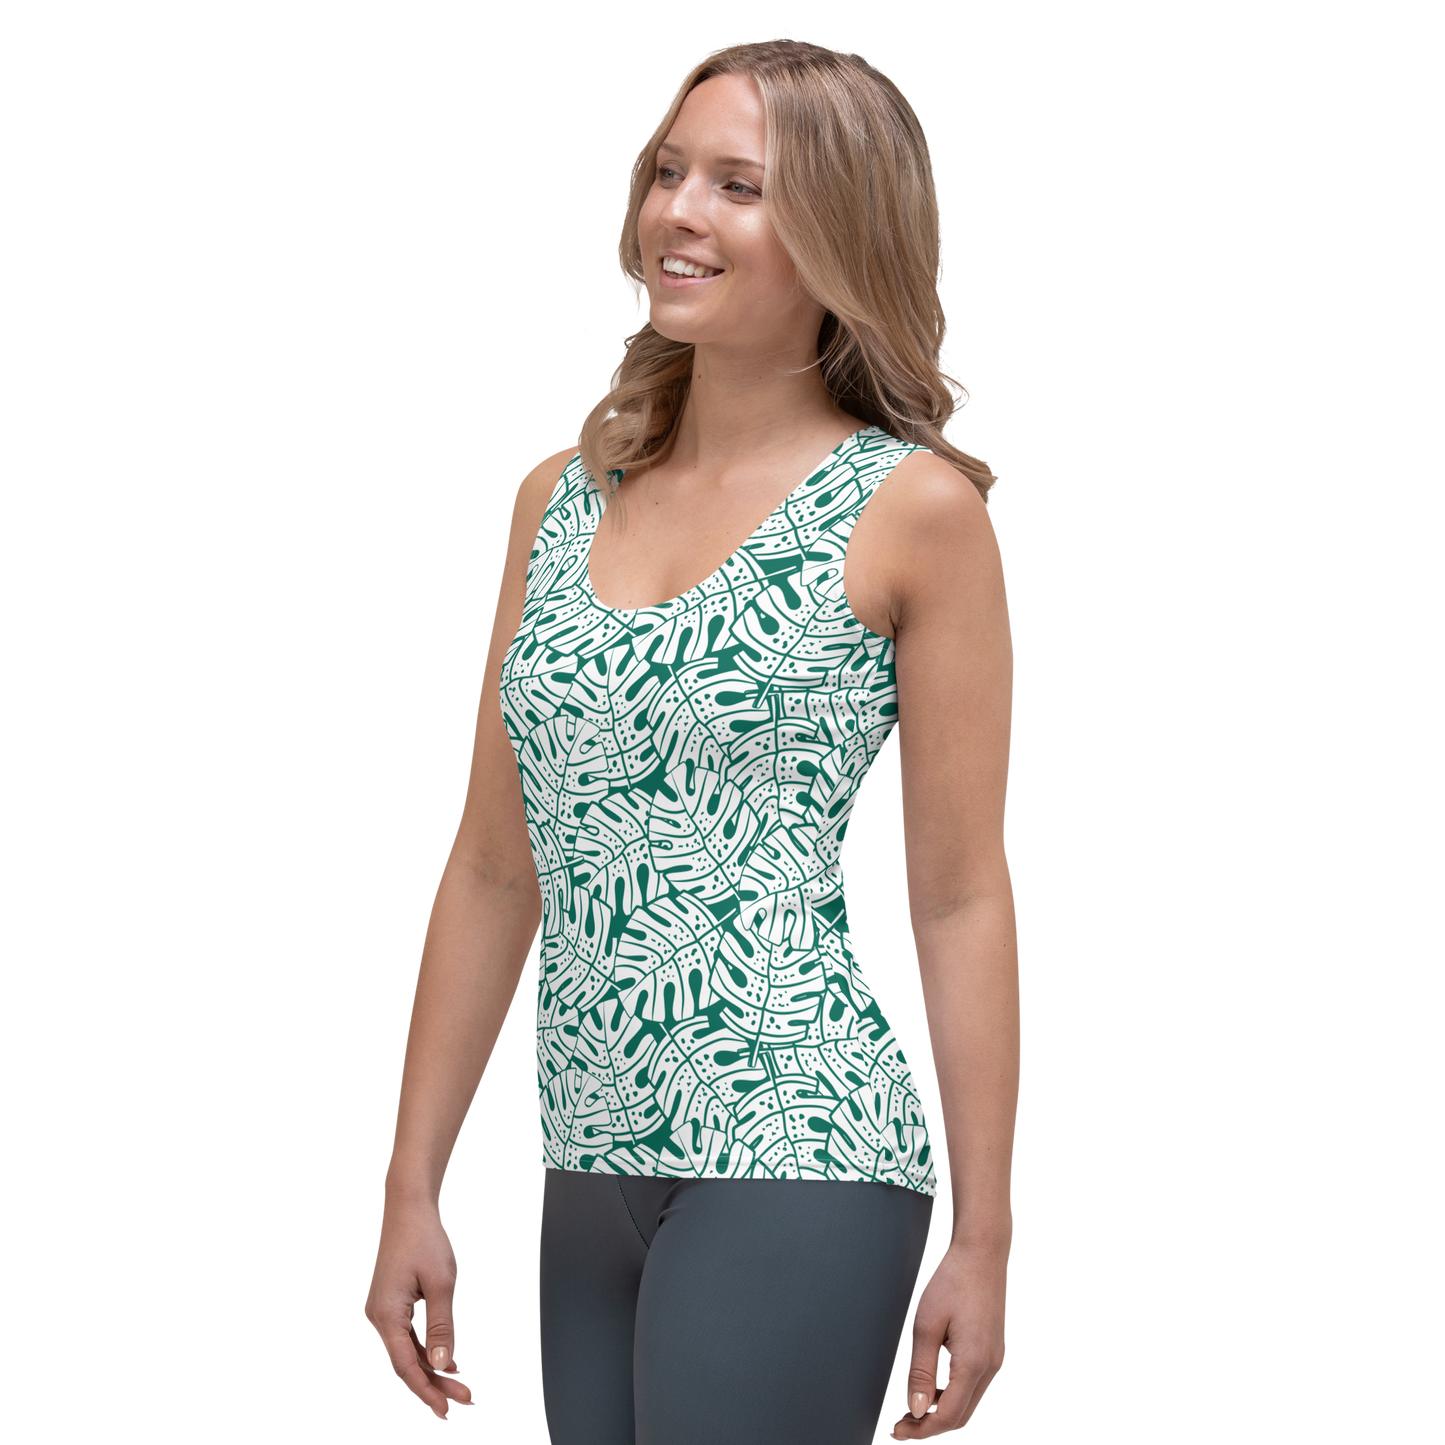 Colorful Fall Leaves | Seamless Patterns | All-Over Print Women's Tank Top - #9